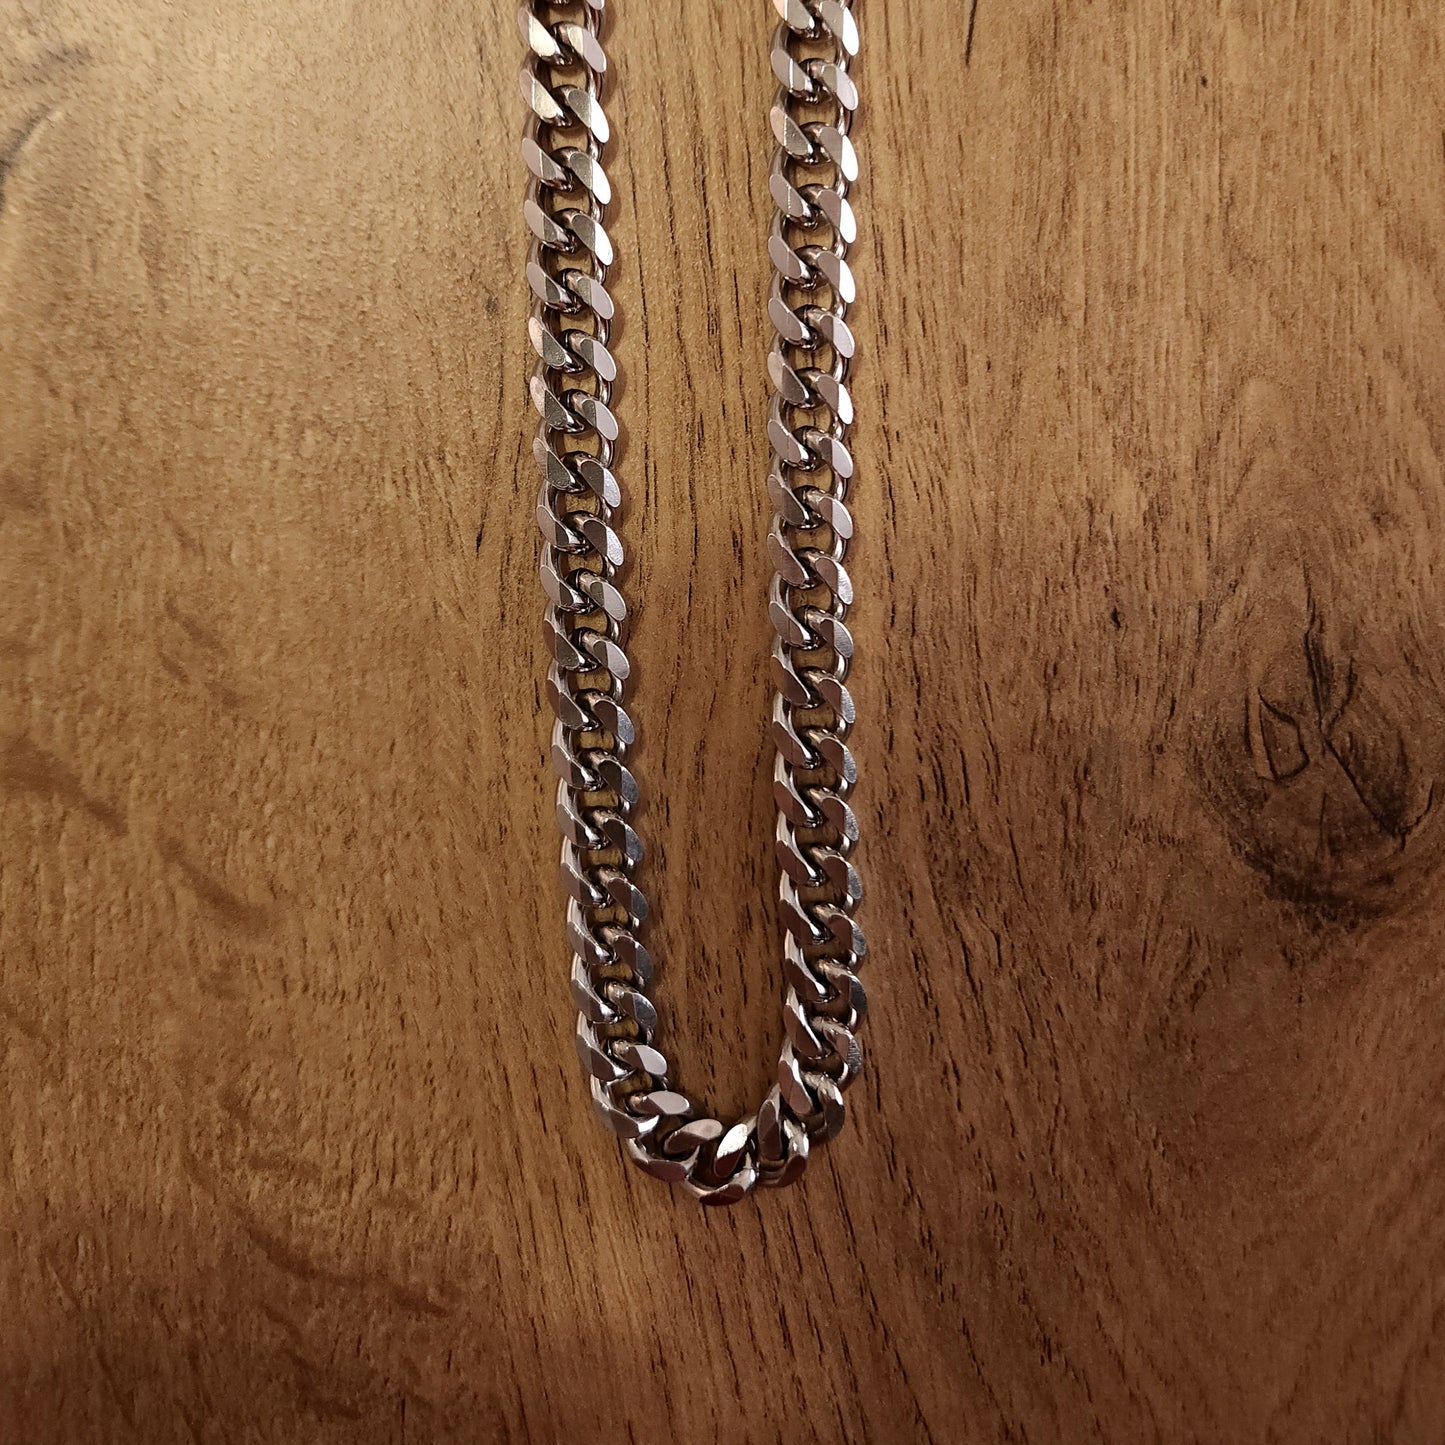 6mm Stainless Steel Curb Link Chain